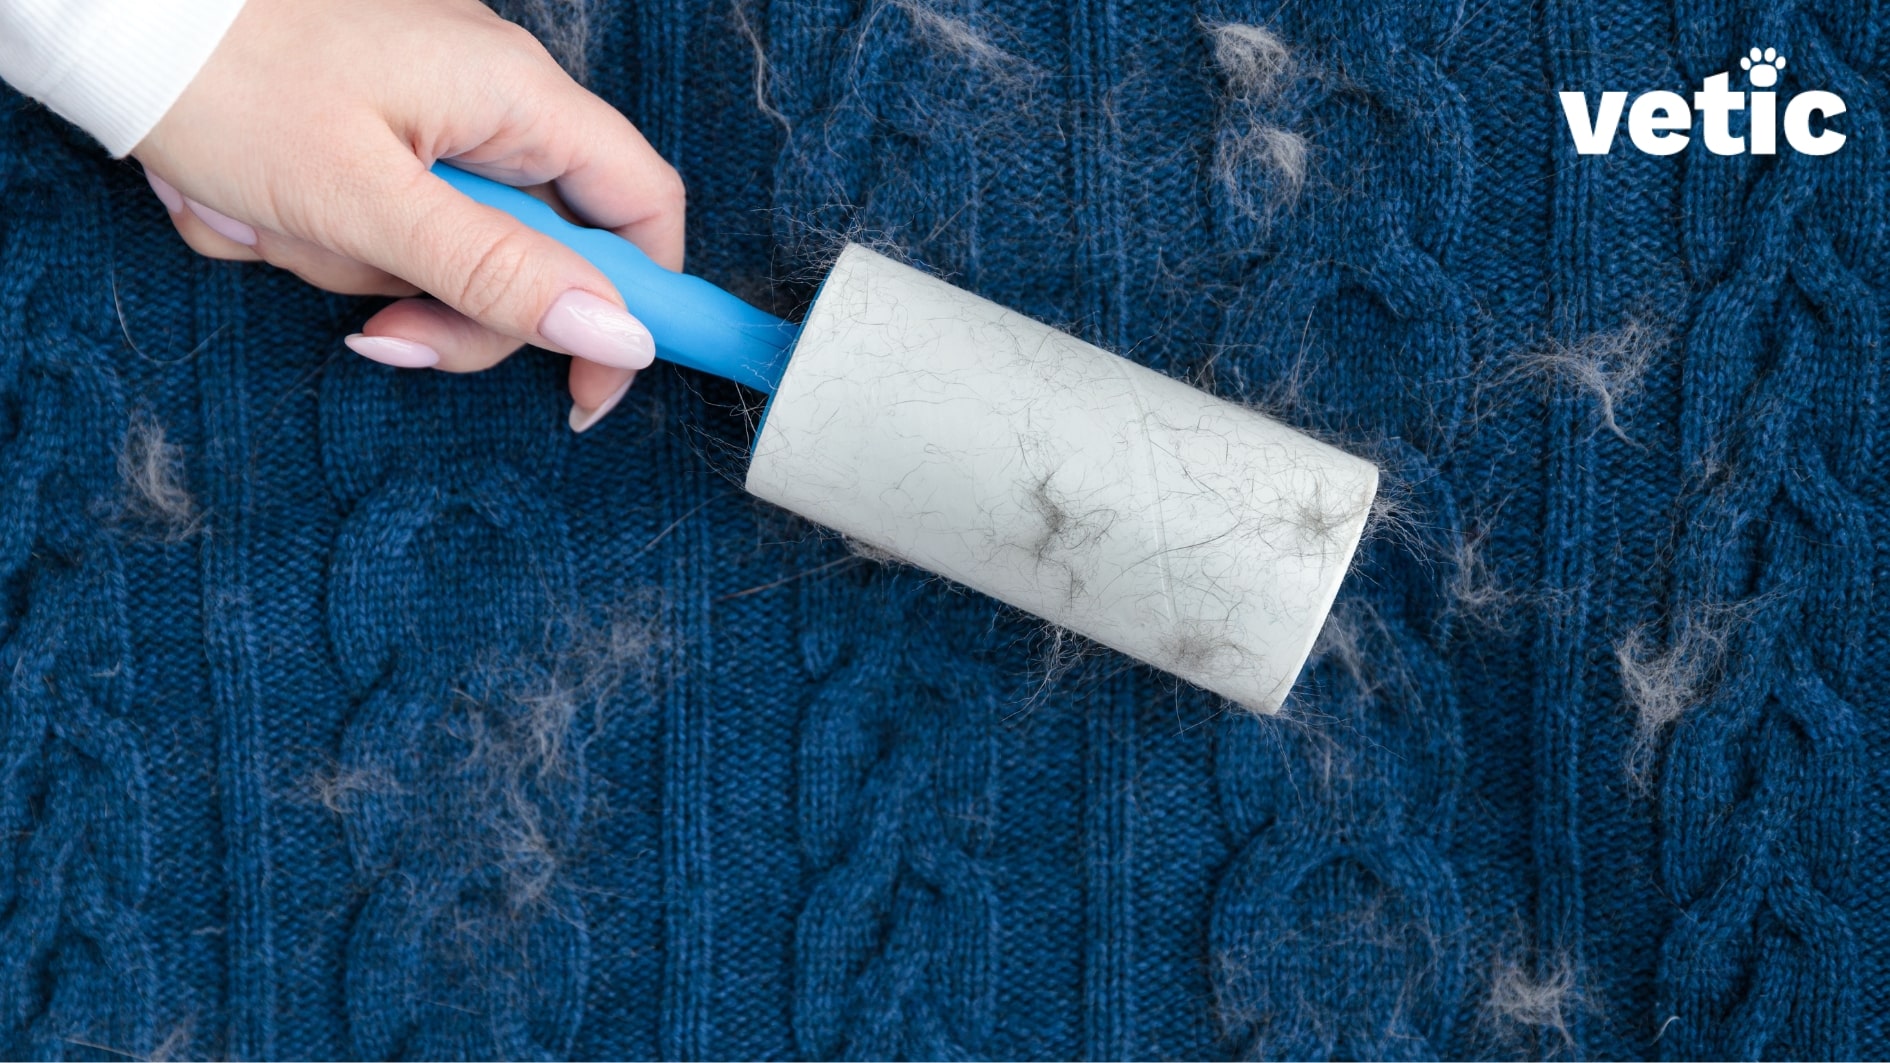 Woman's hand with her white cuff showing, and manicured nails removing pet fur from a blue cable knit sweater using a lint roller. managing shedding in cats may be impossible, but you can keep your clothes free of fur by using a lint roller.